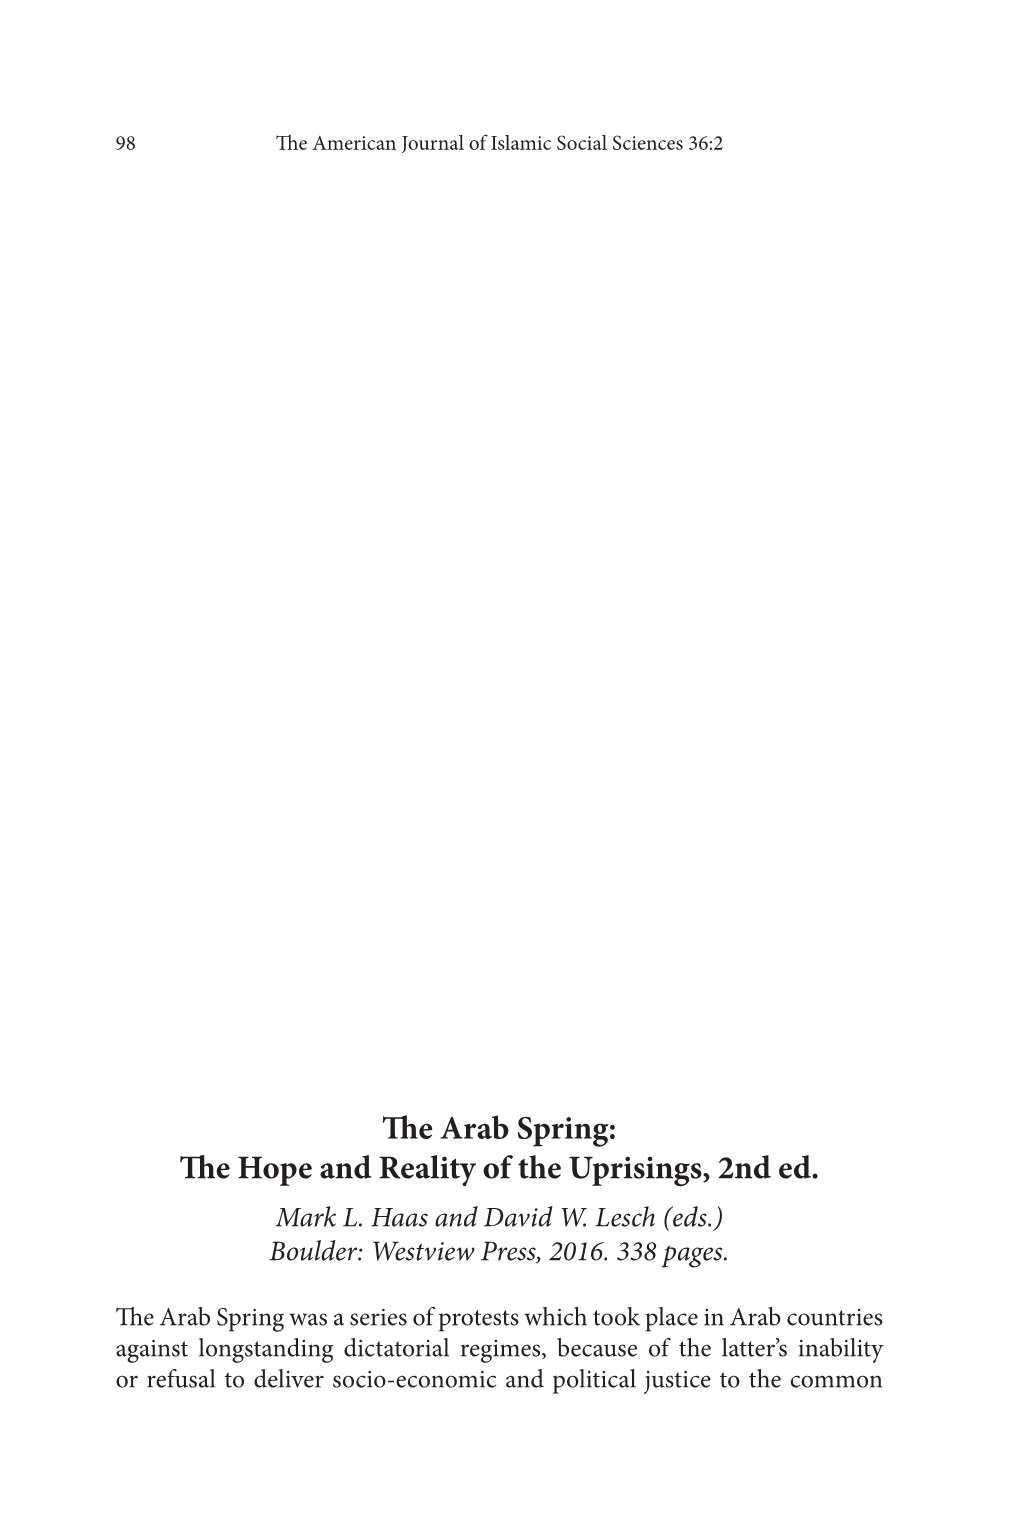 The Arab Spring: the Hope and Reality of the Uprisings, 2Nd Ed